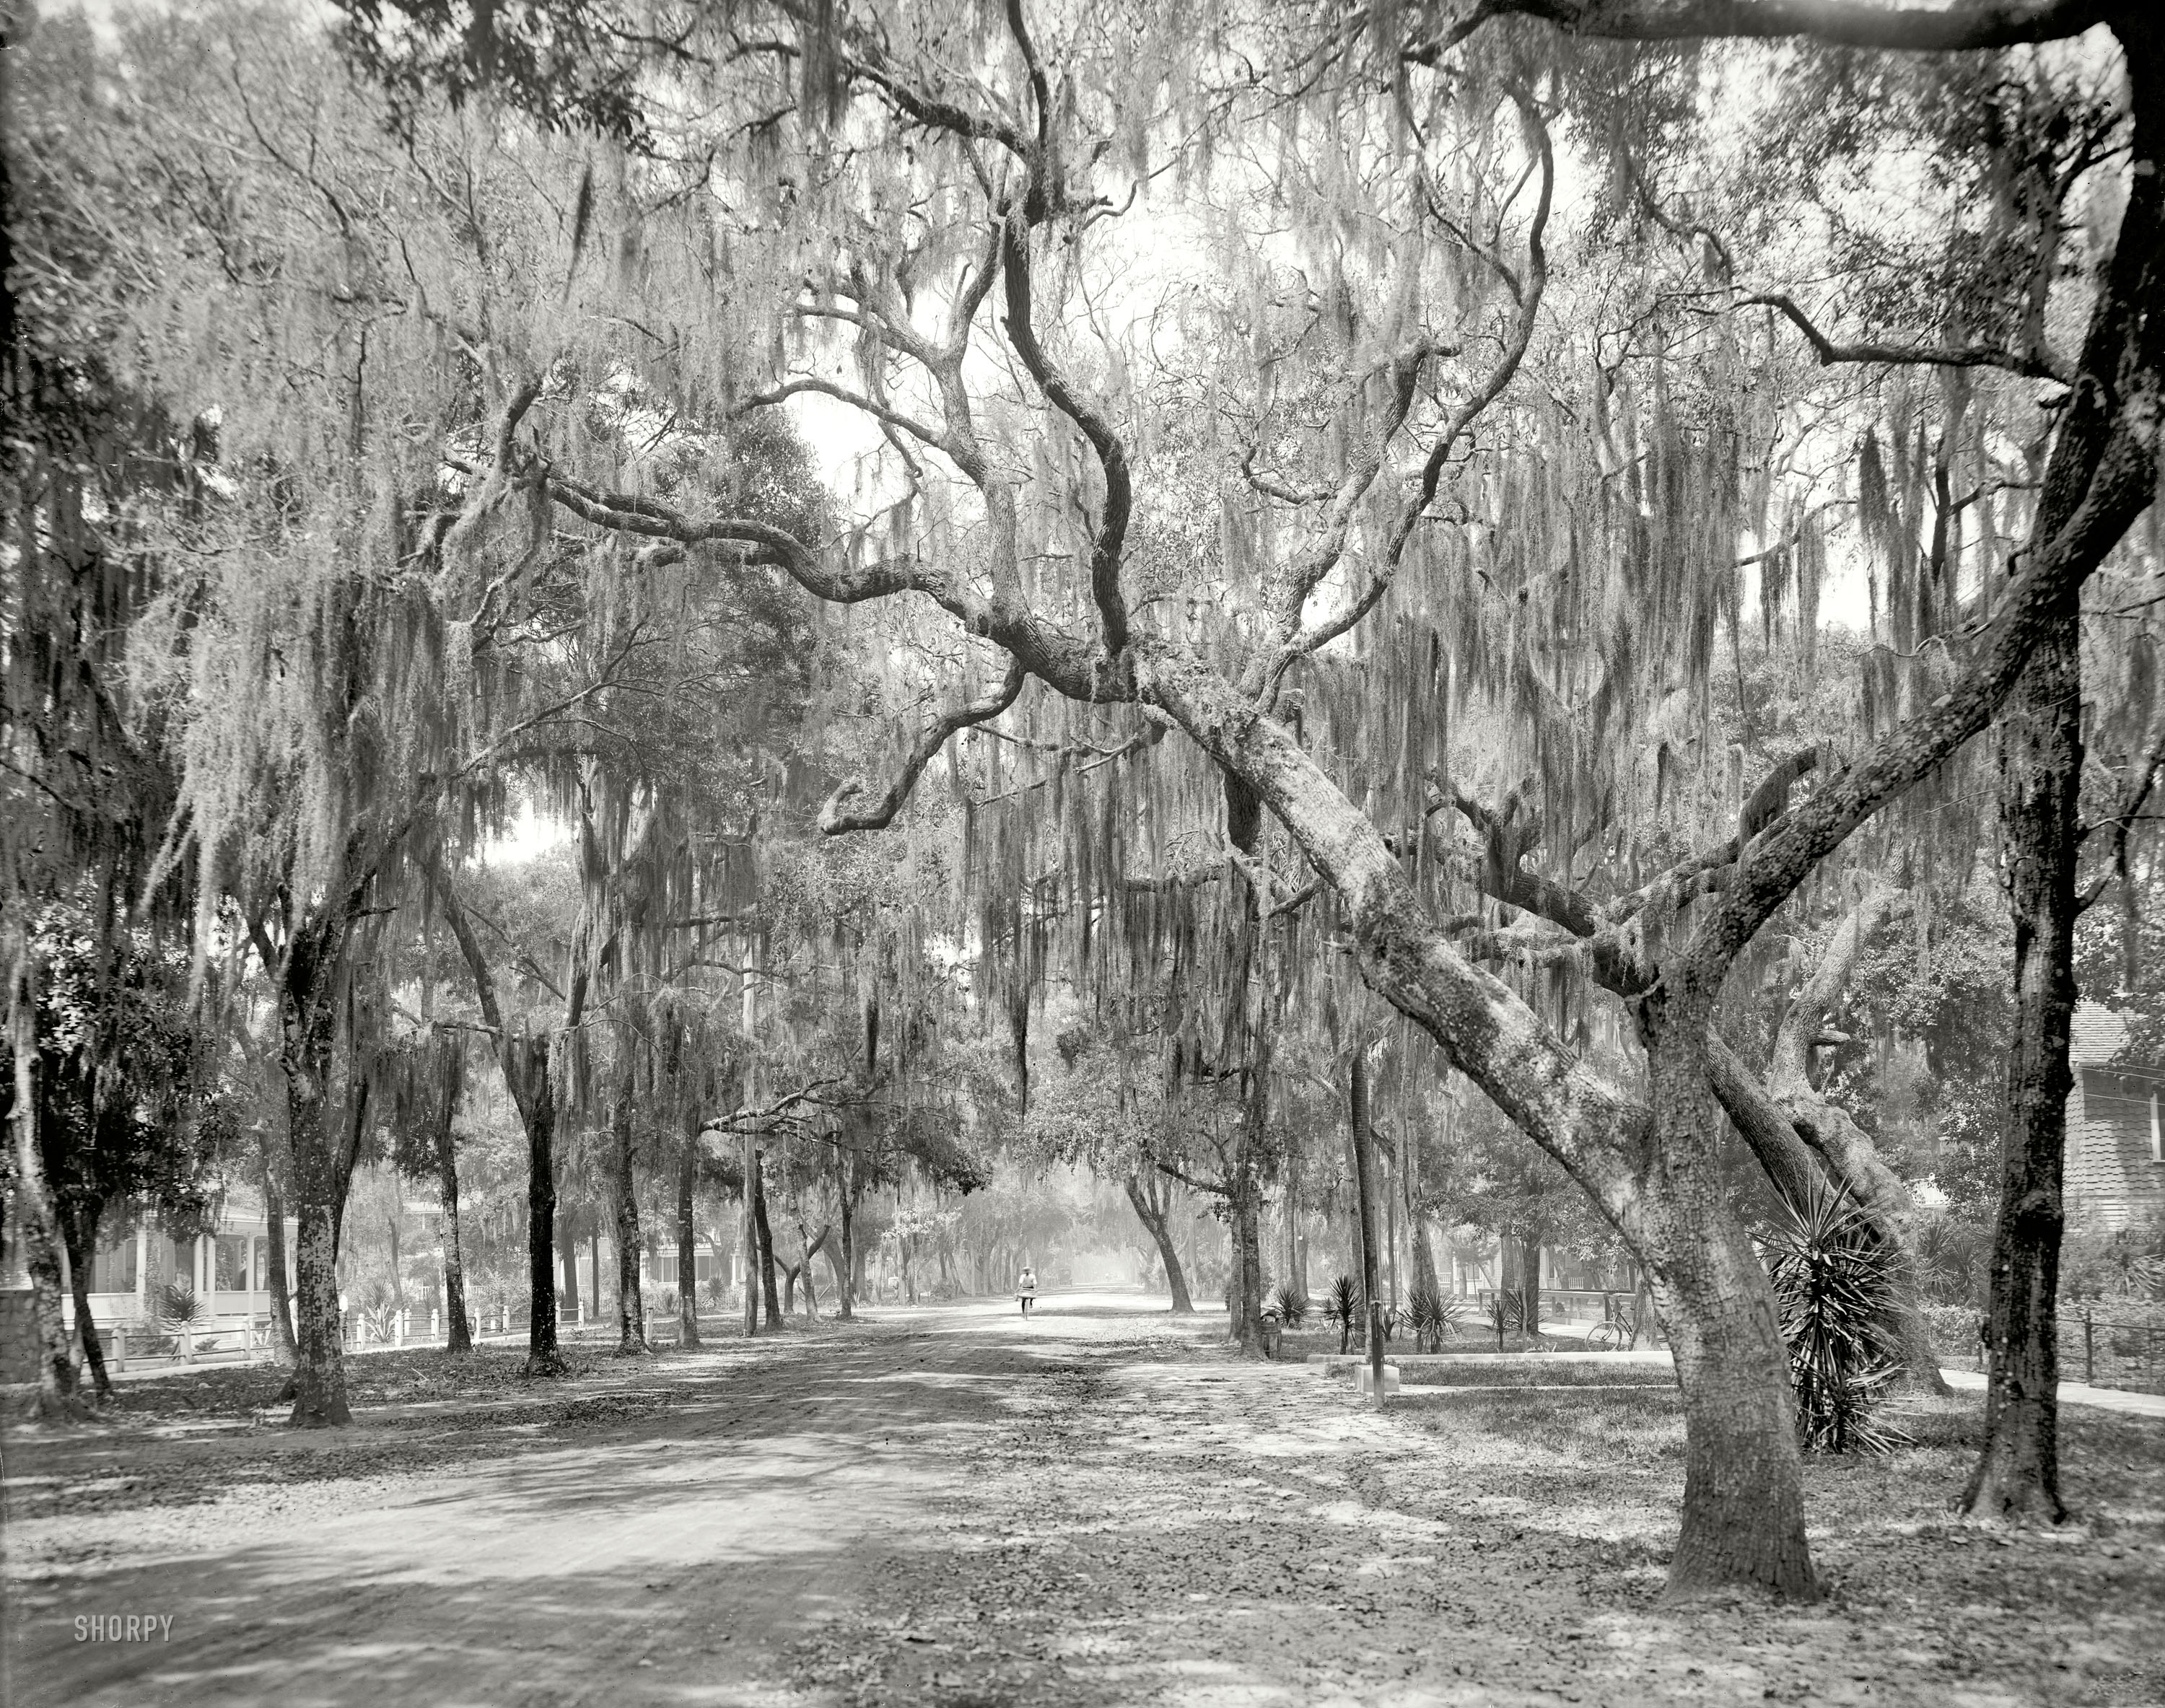 Daytona Beach, Florida, circa 1910. "South Ridgewood Avenue." Over the past century, the trees have thinned and the traffic has thickened. View full size.